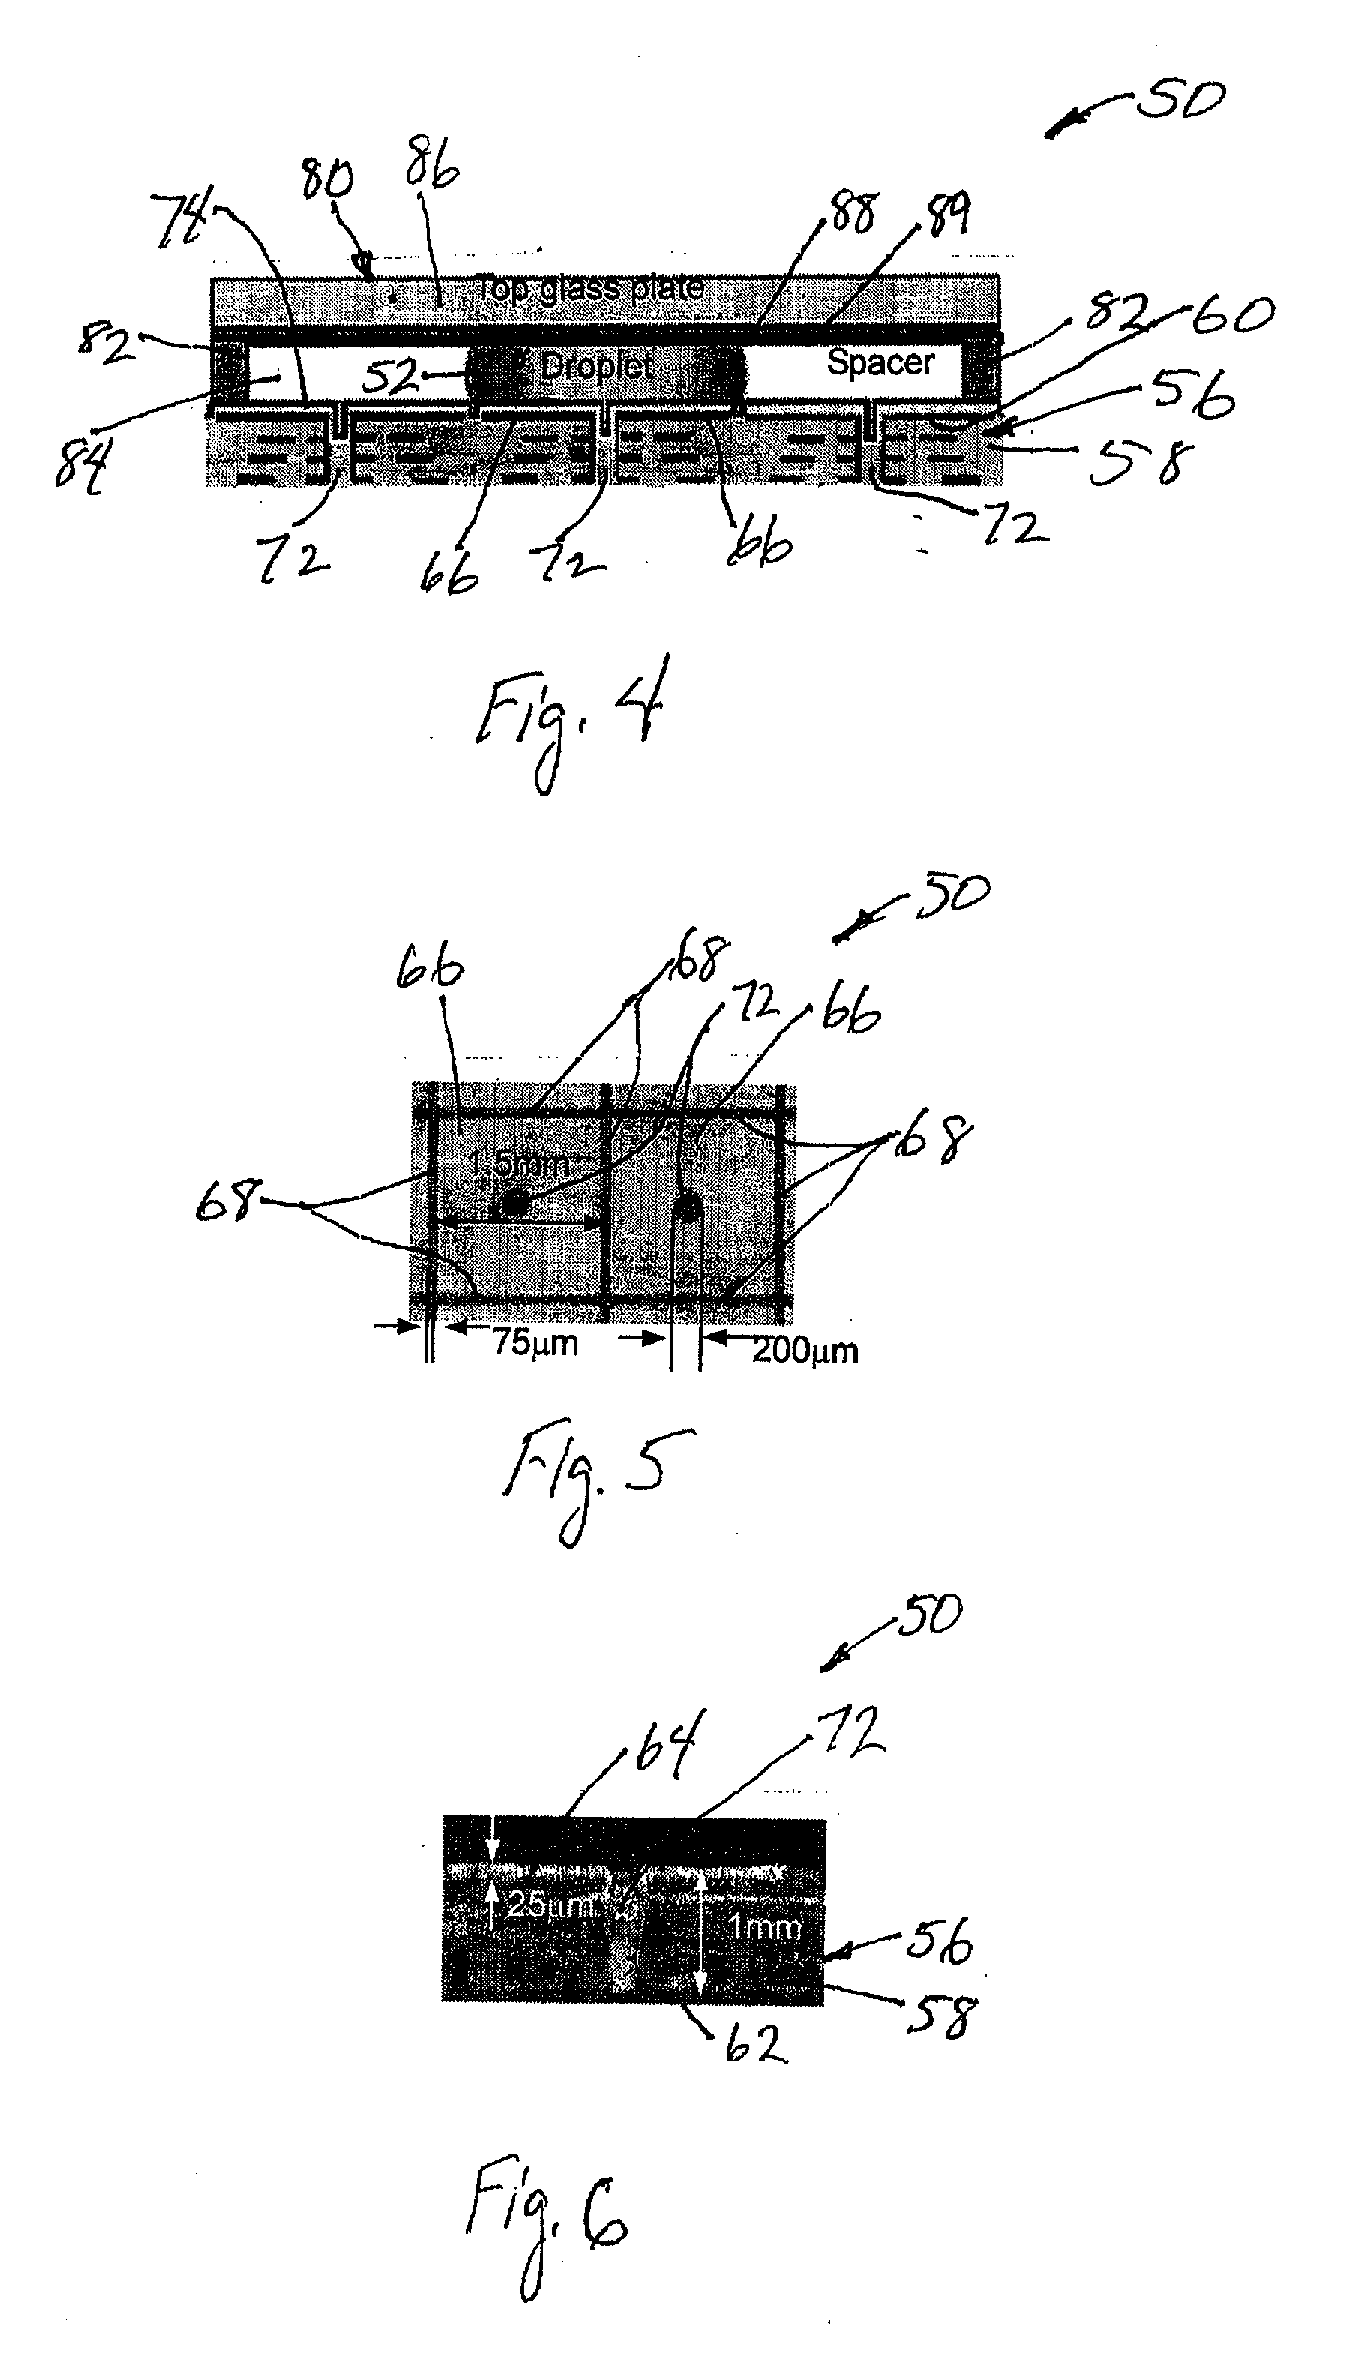 Small object moving on printed circuit board